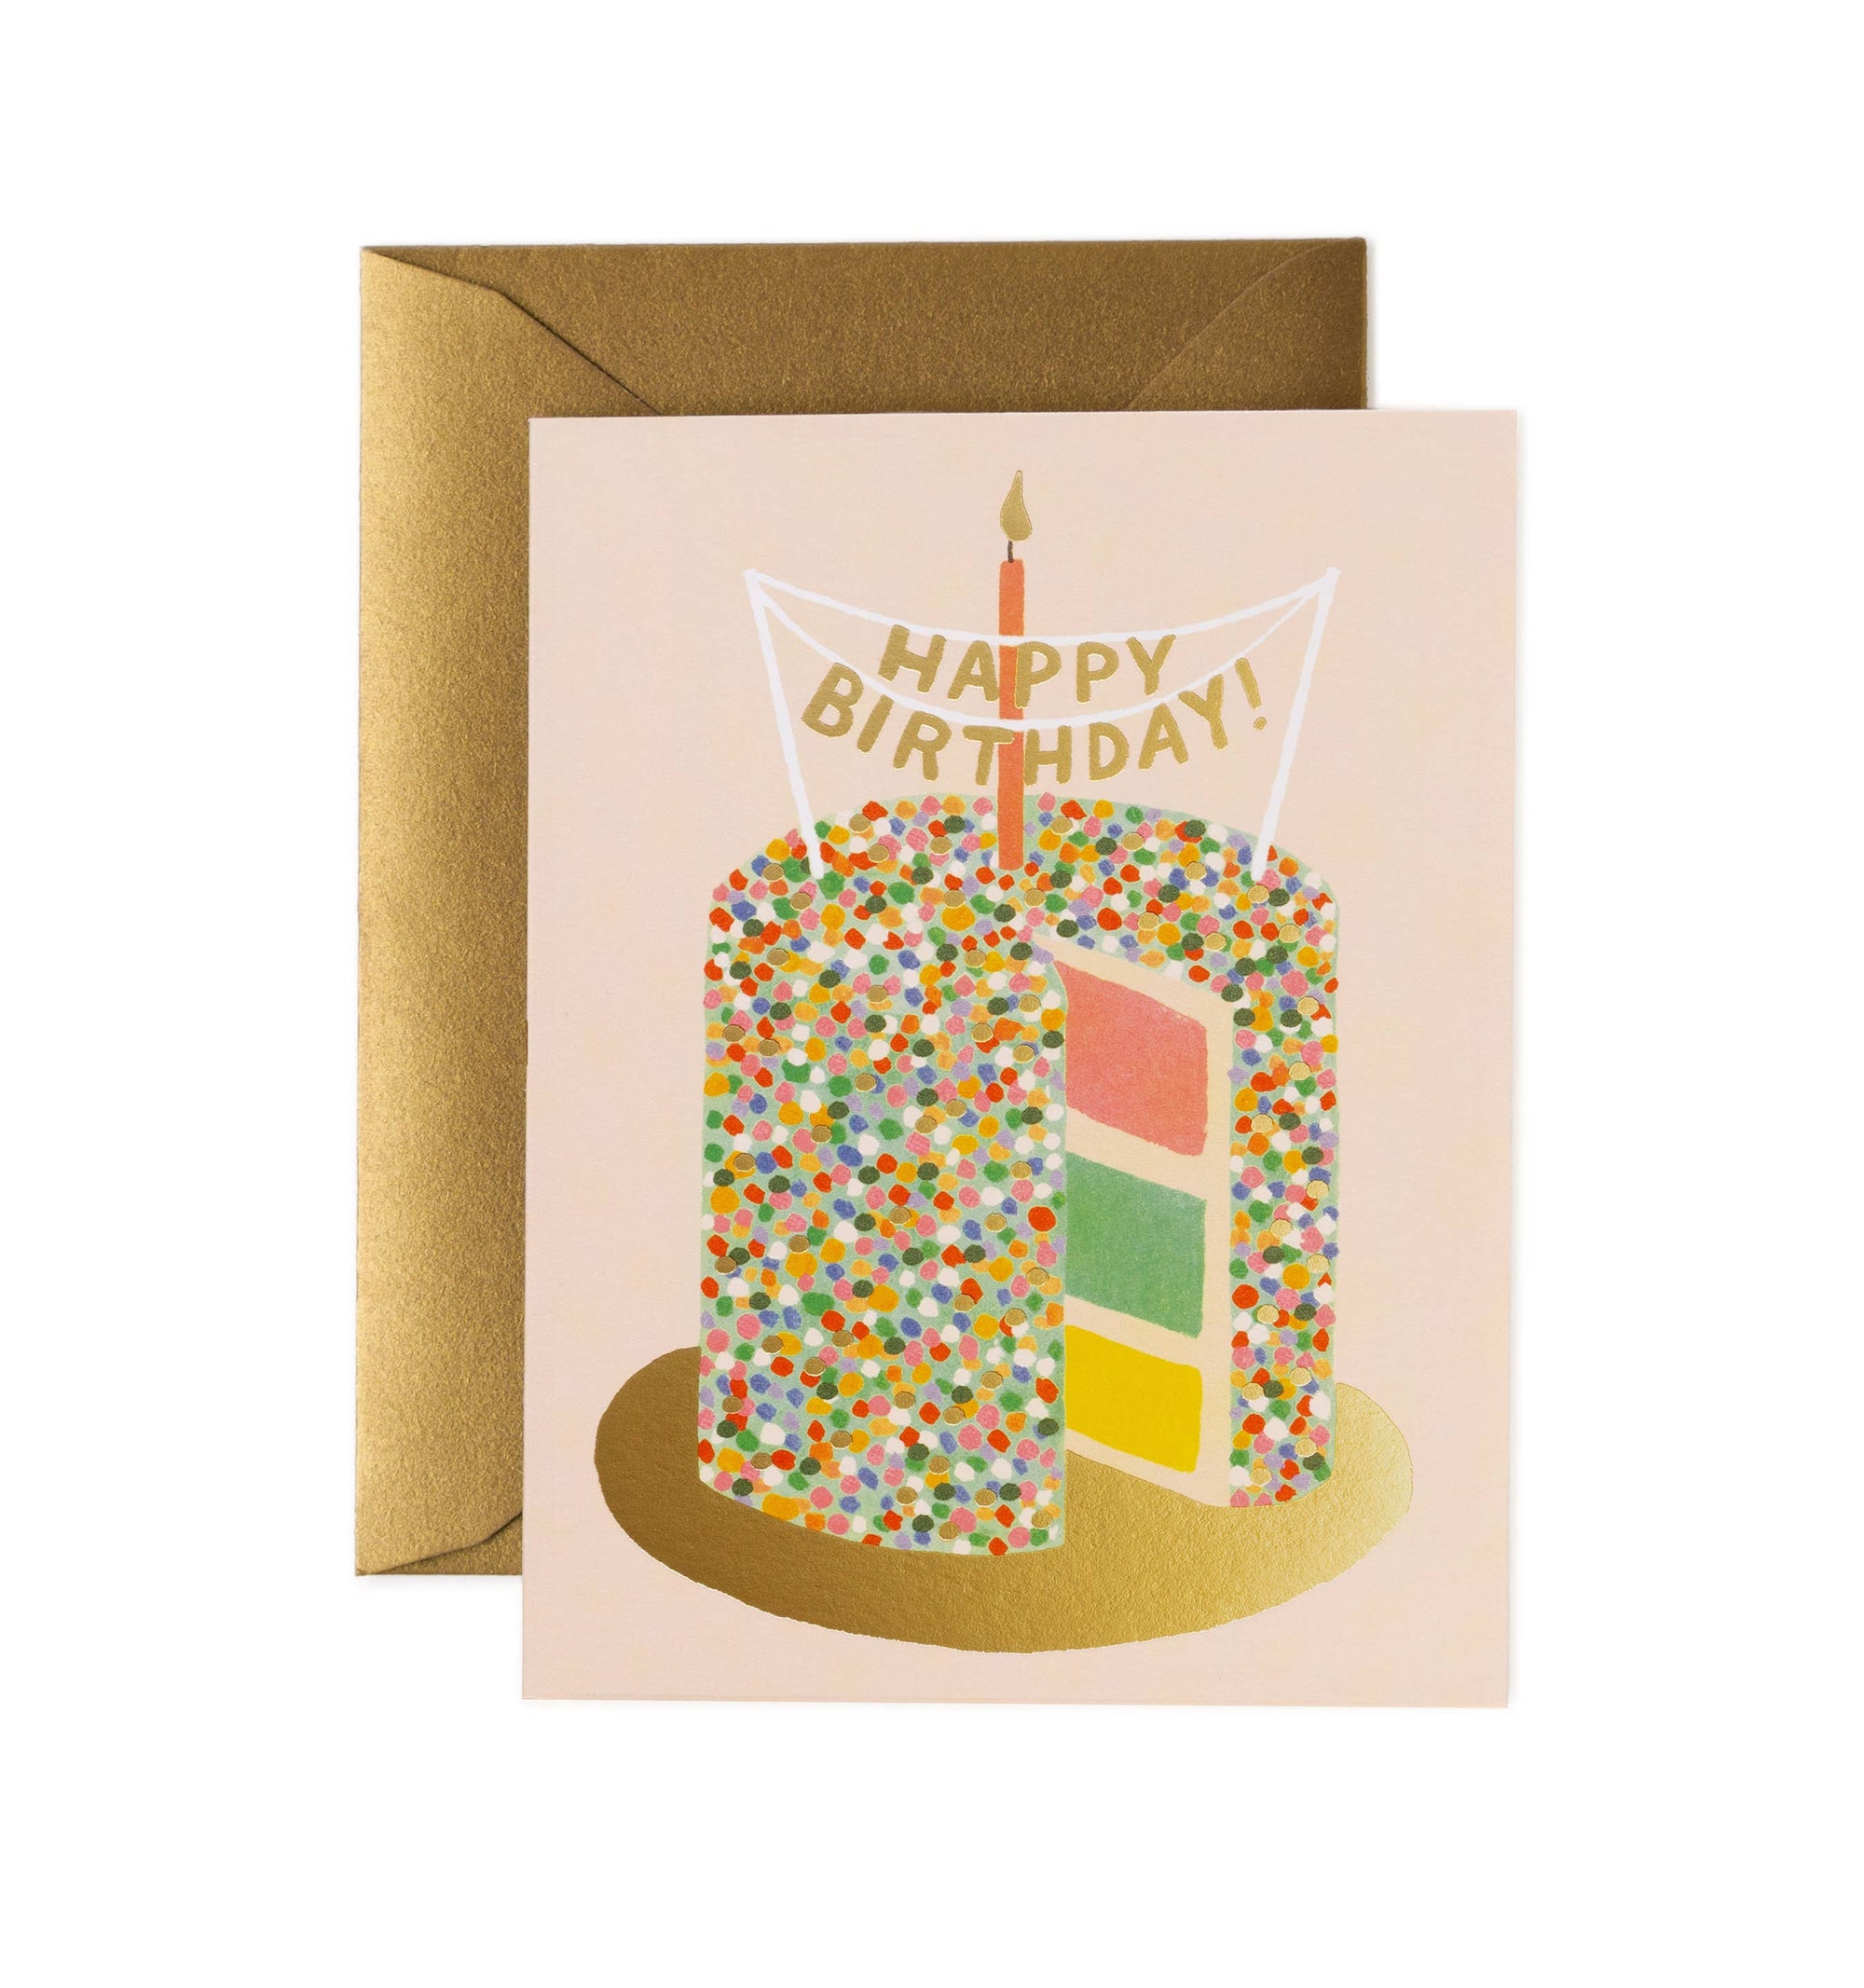 Boxed Set of Layer Cake Cards by Rifle Paper Co. - The Preppy Bunny